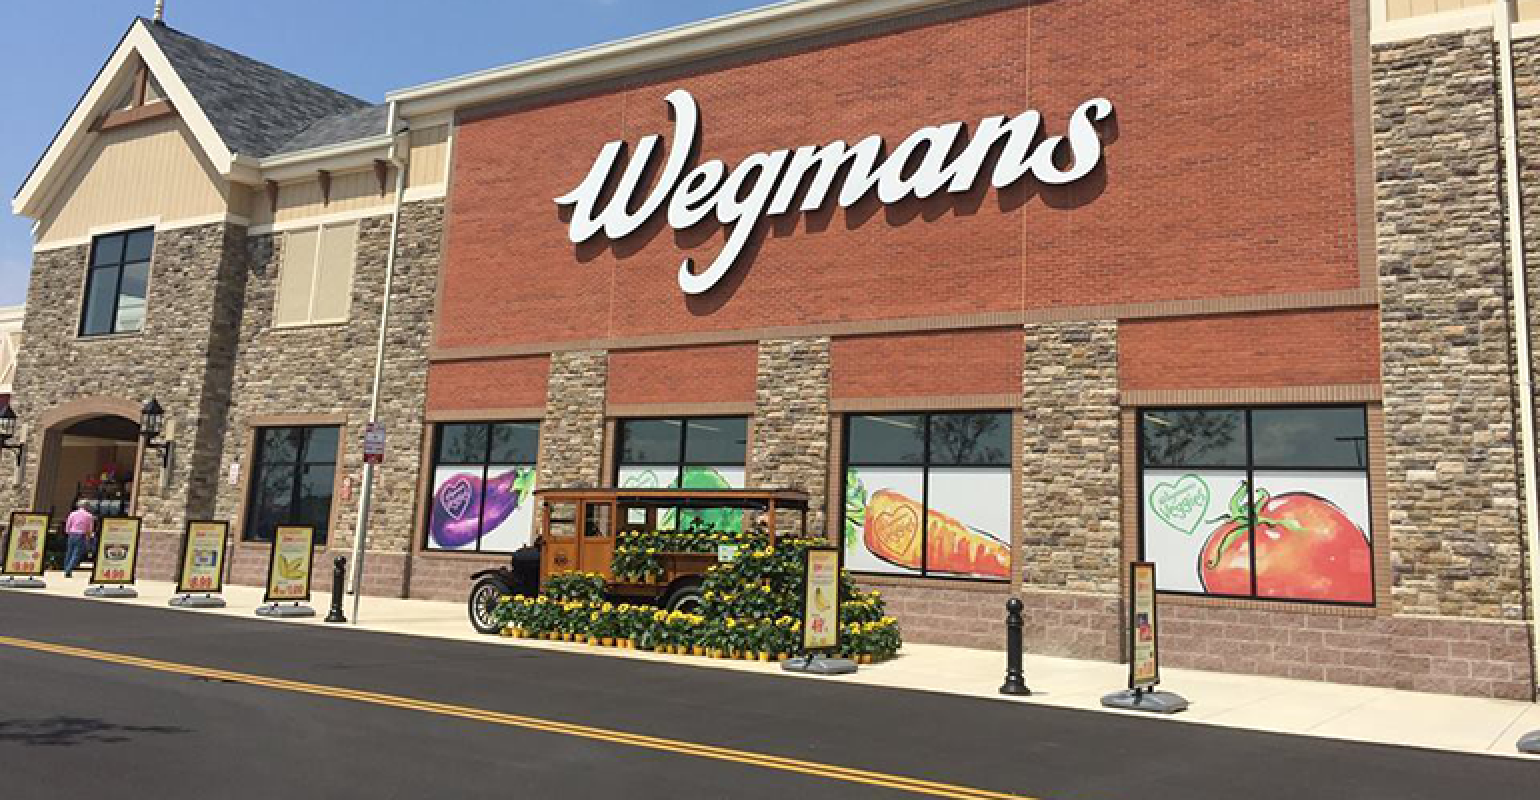 When Does Wegmans Stop Selling Alcohol?